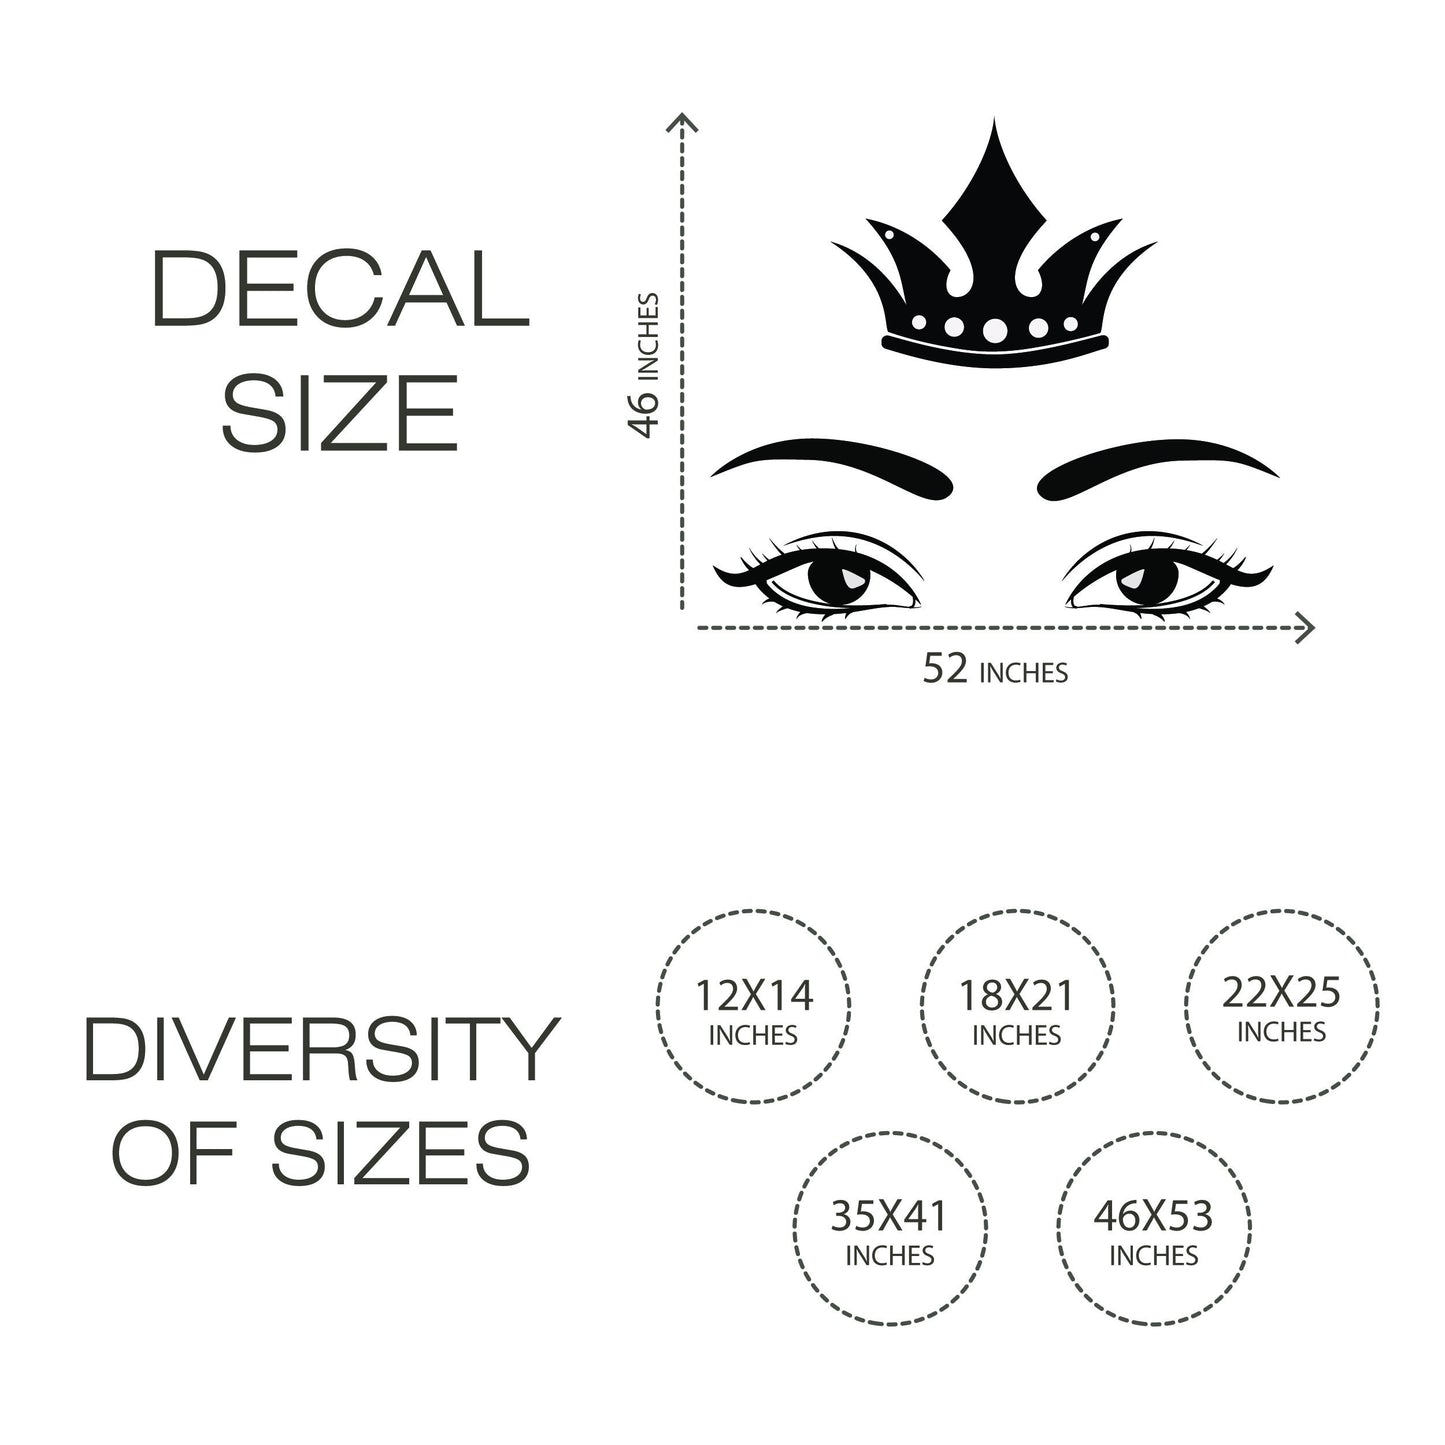 Wall Decal Vinyl Eyes and Crown - Vinyl Sticker Great for Makeup Area, Spa, Removable Sticker